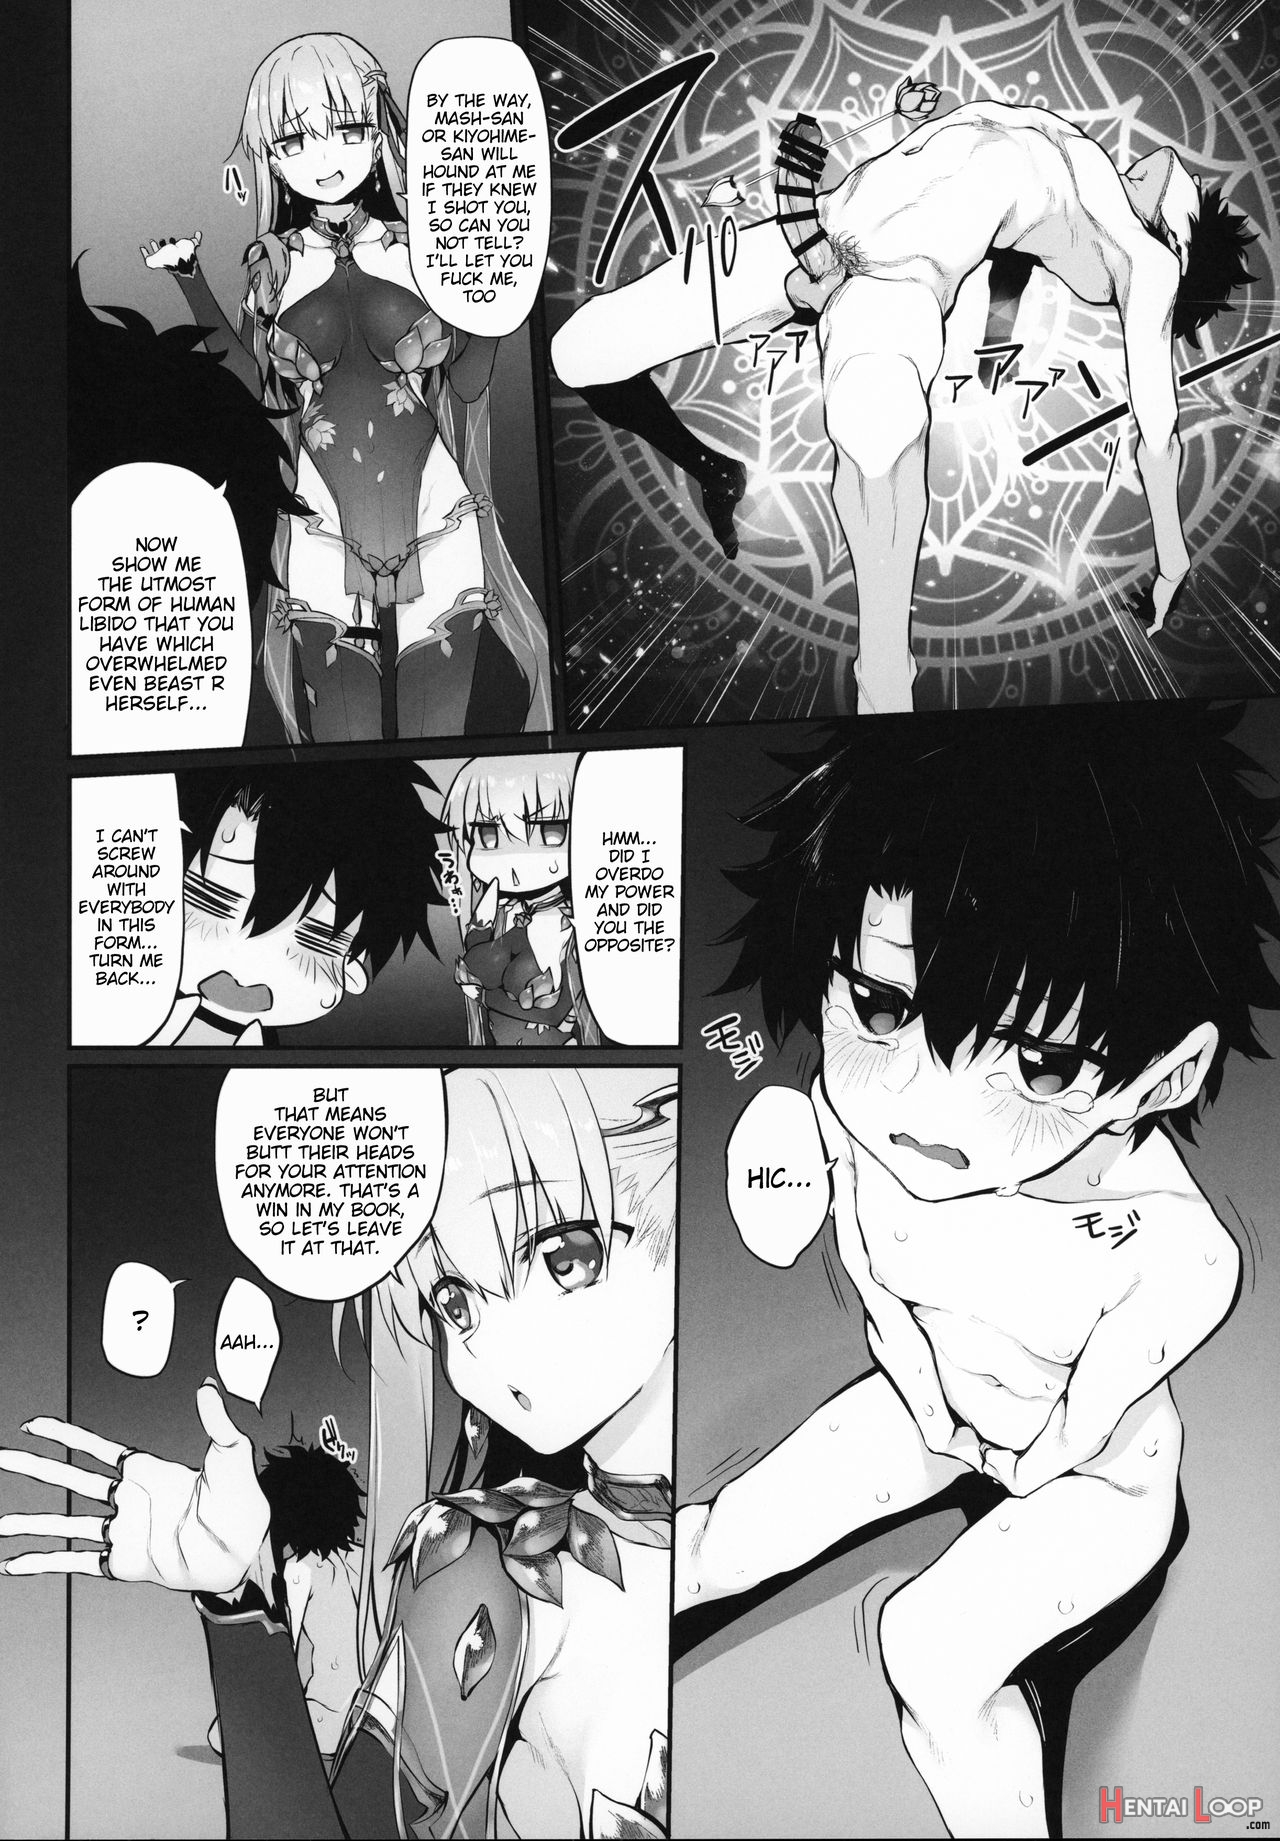 Marked Girls Vol. 21 page 5